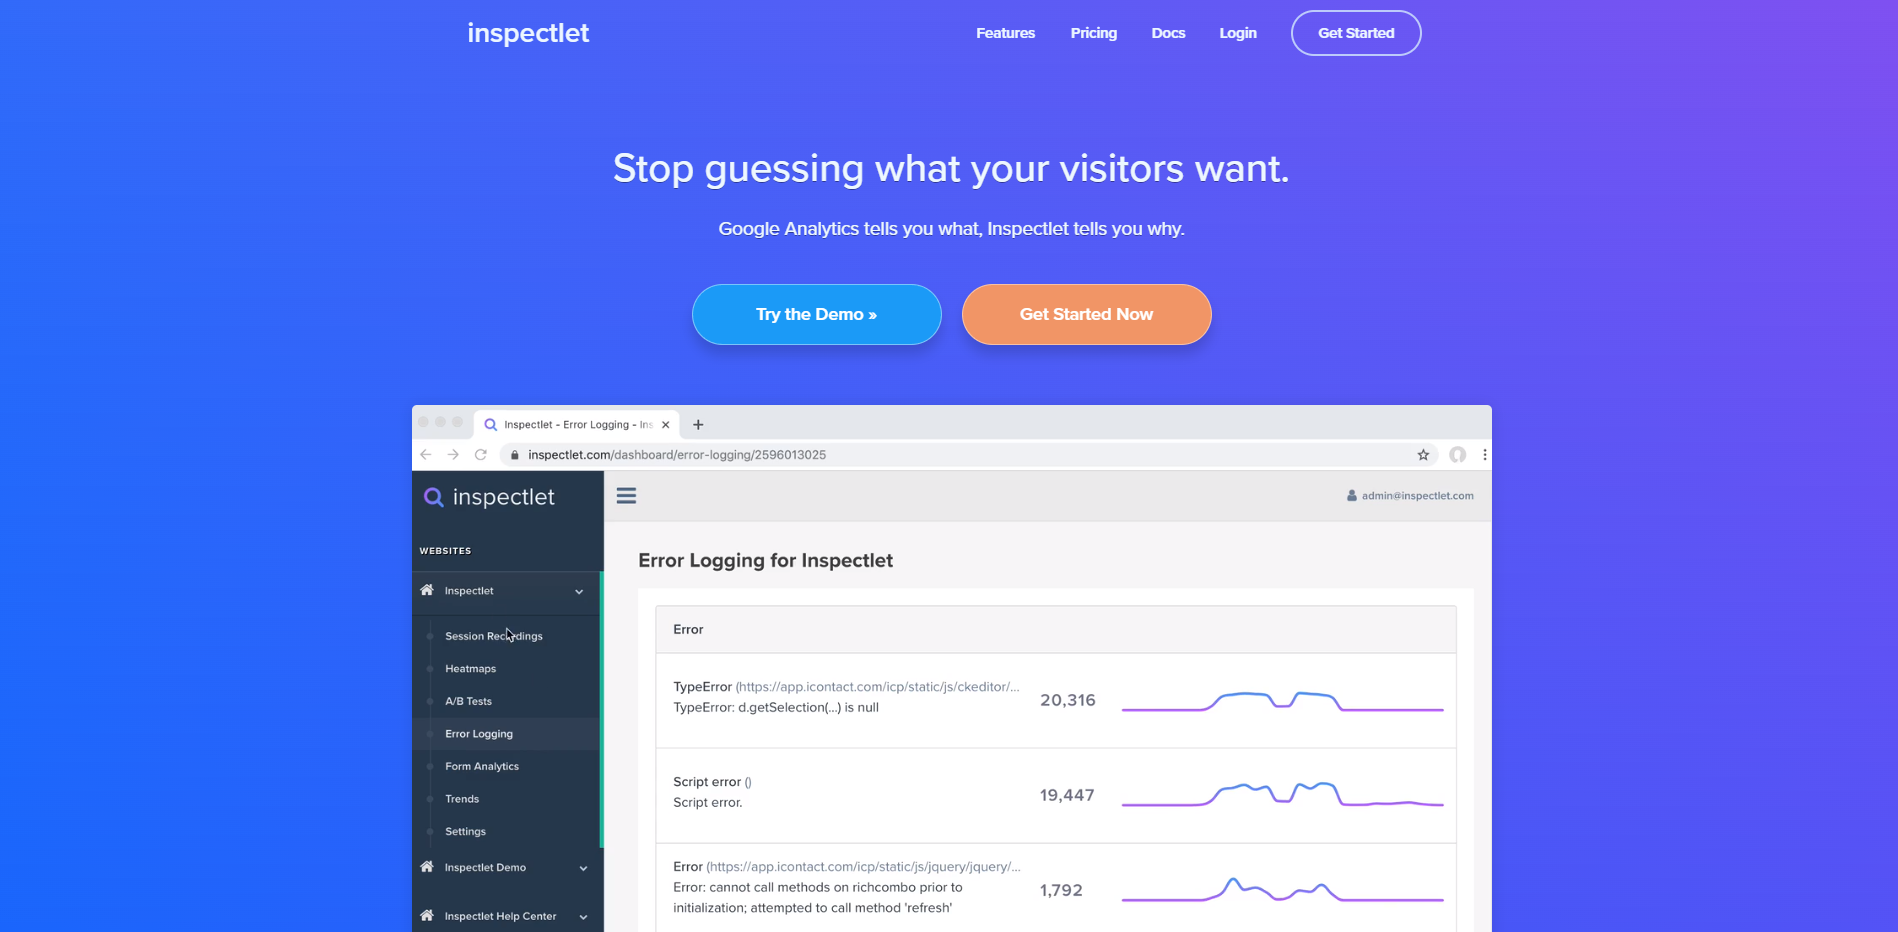 Homepage of inspectlet.com showing the content above-the-fold.